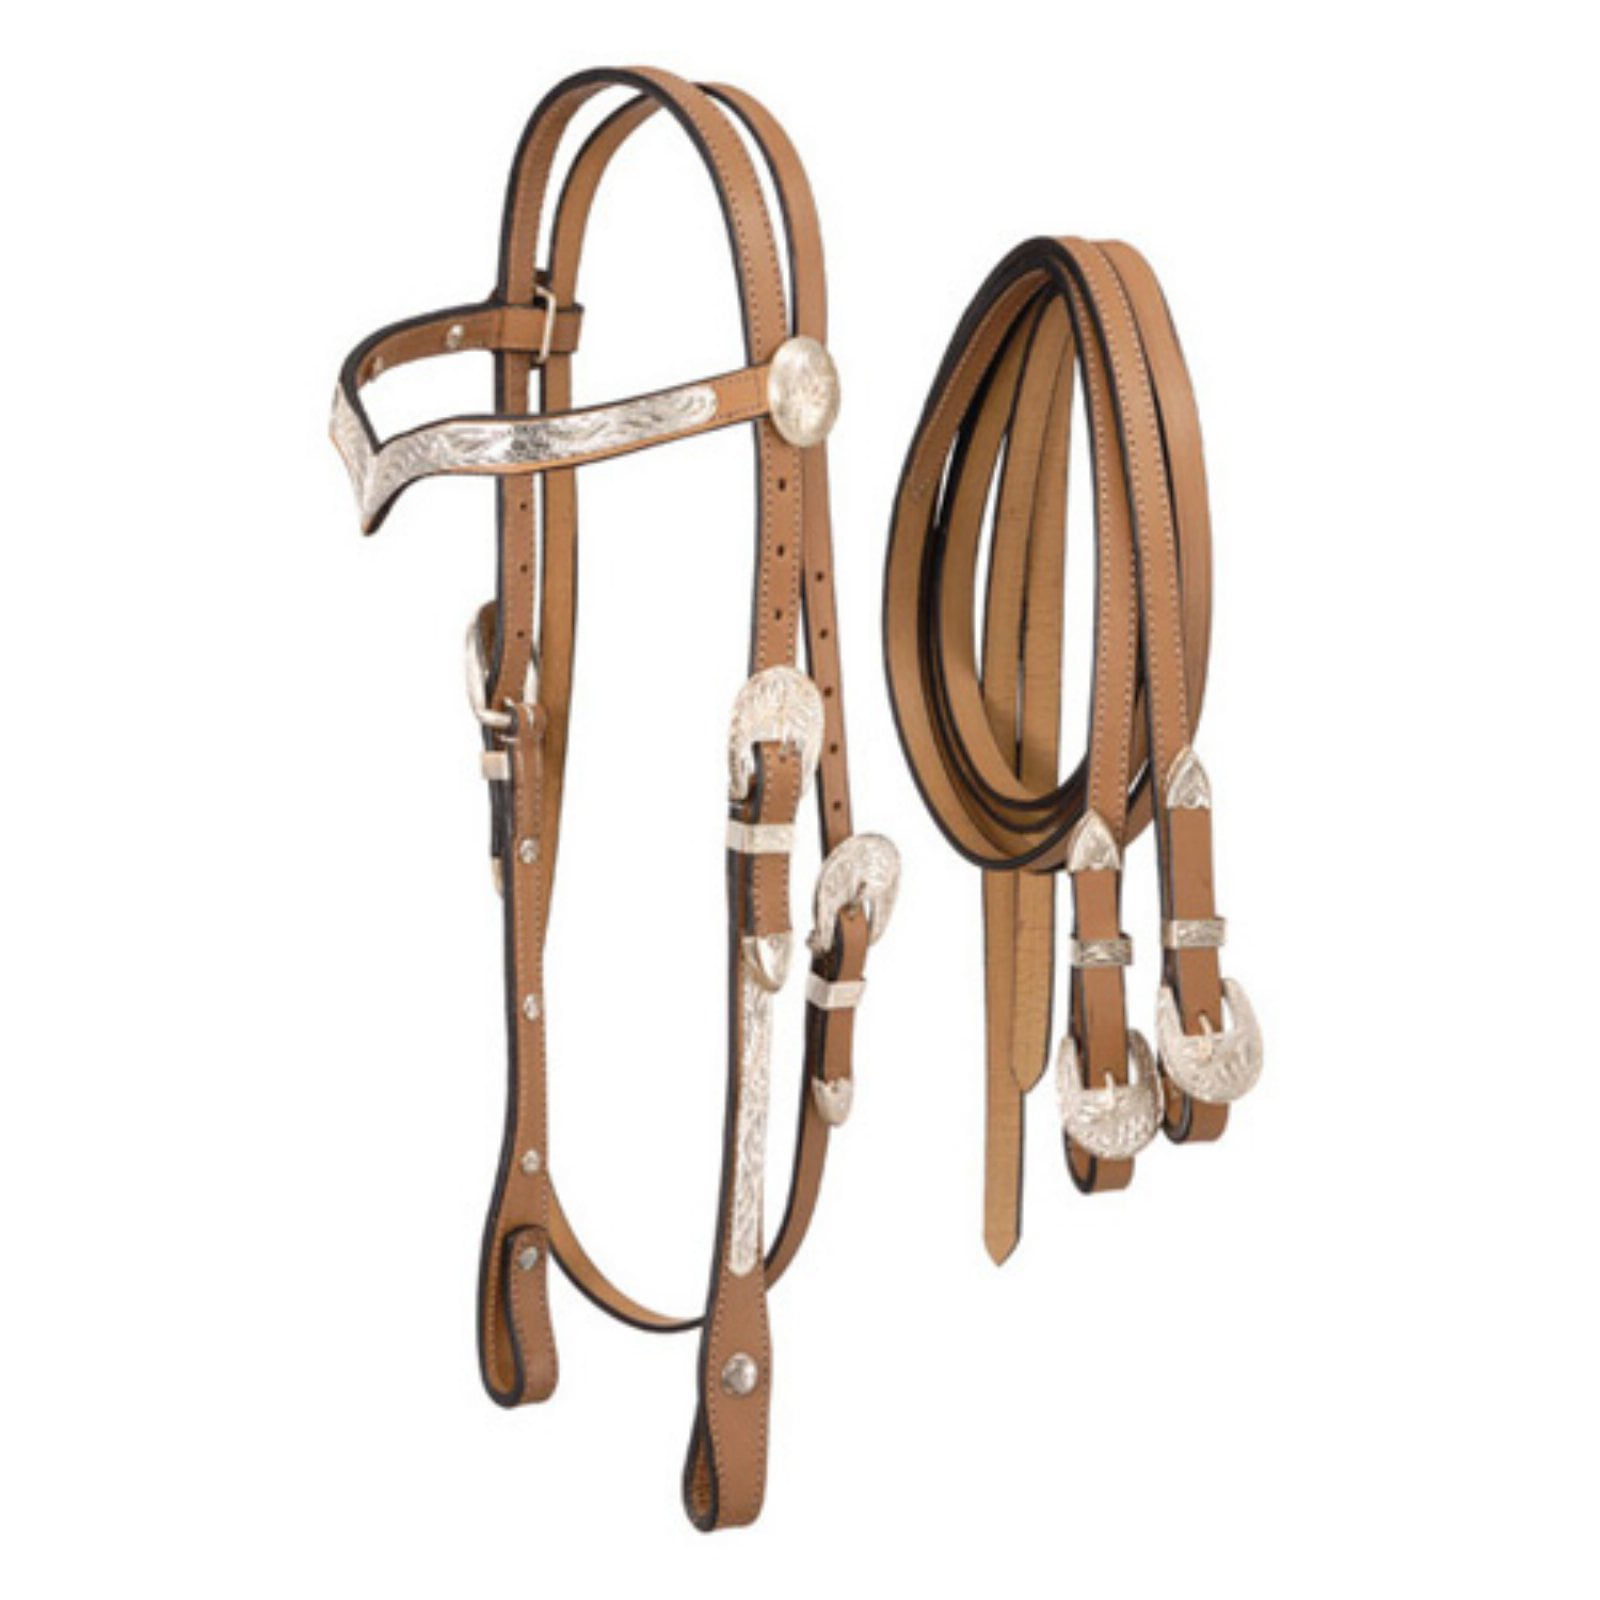 Light Oil Royal King V Browband Show Headstall  with reins Full 